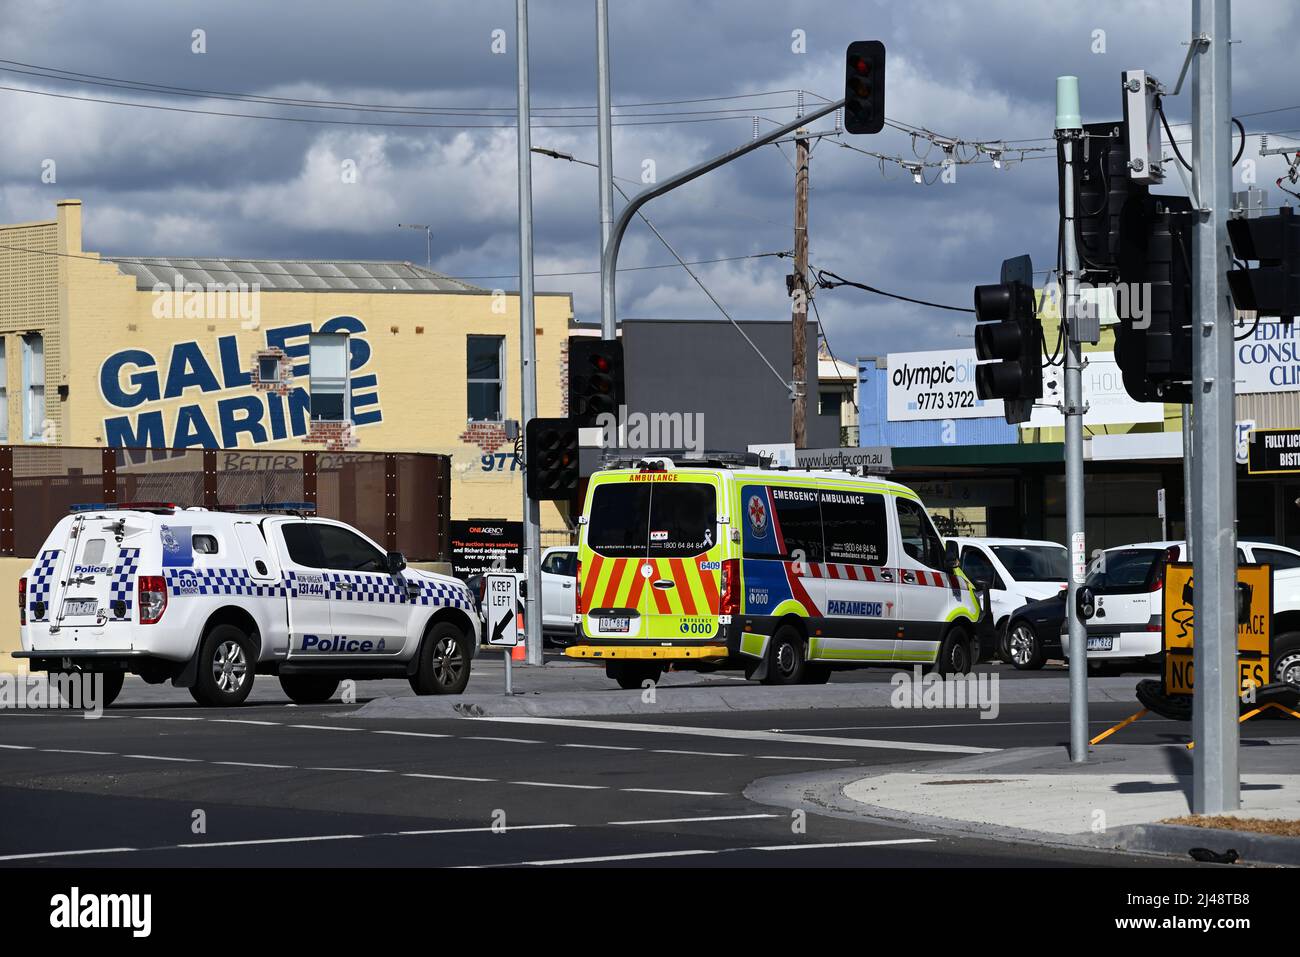 Ambulance and police vehicle stopped at an intersection in the suburbs of Melbourne, with shops and dark clouds in the background Stock Photo